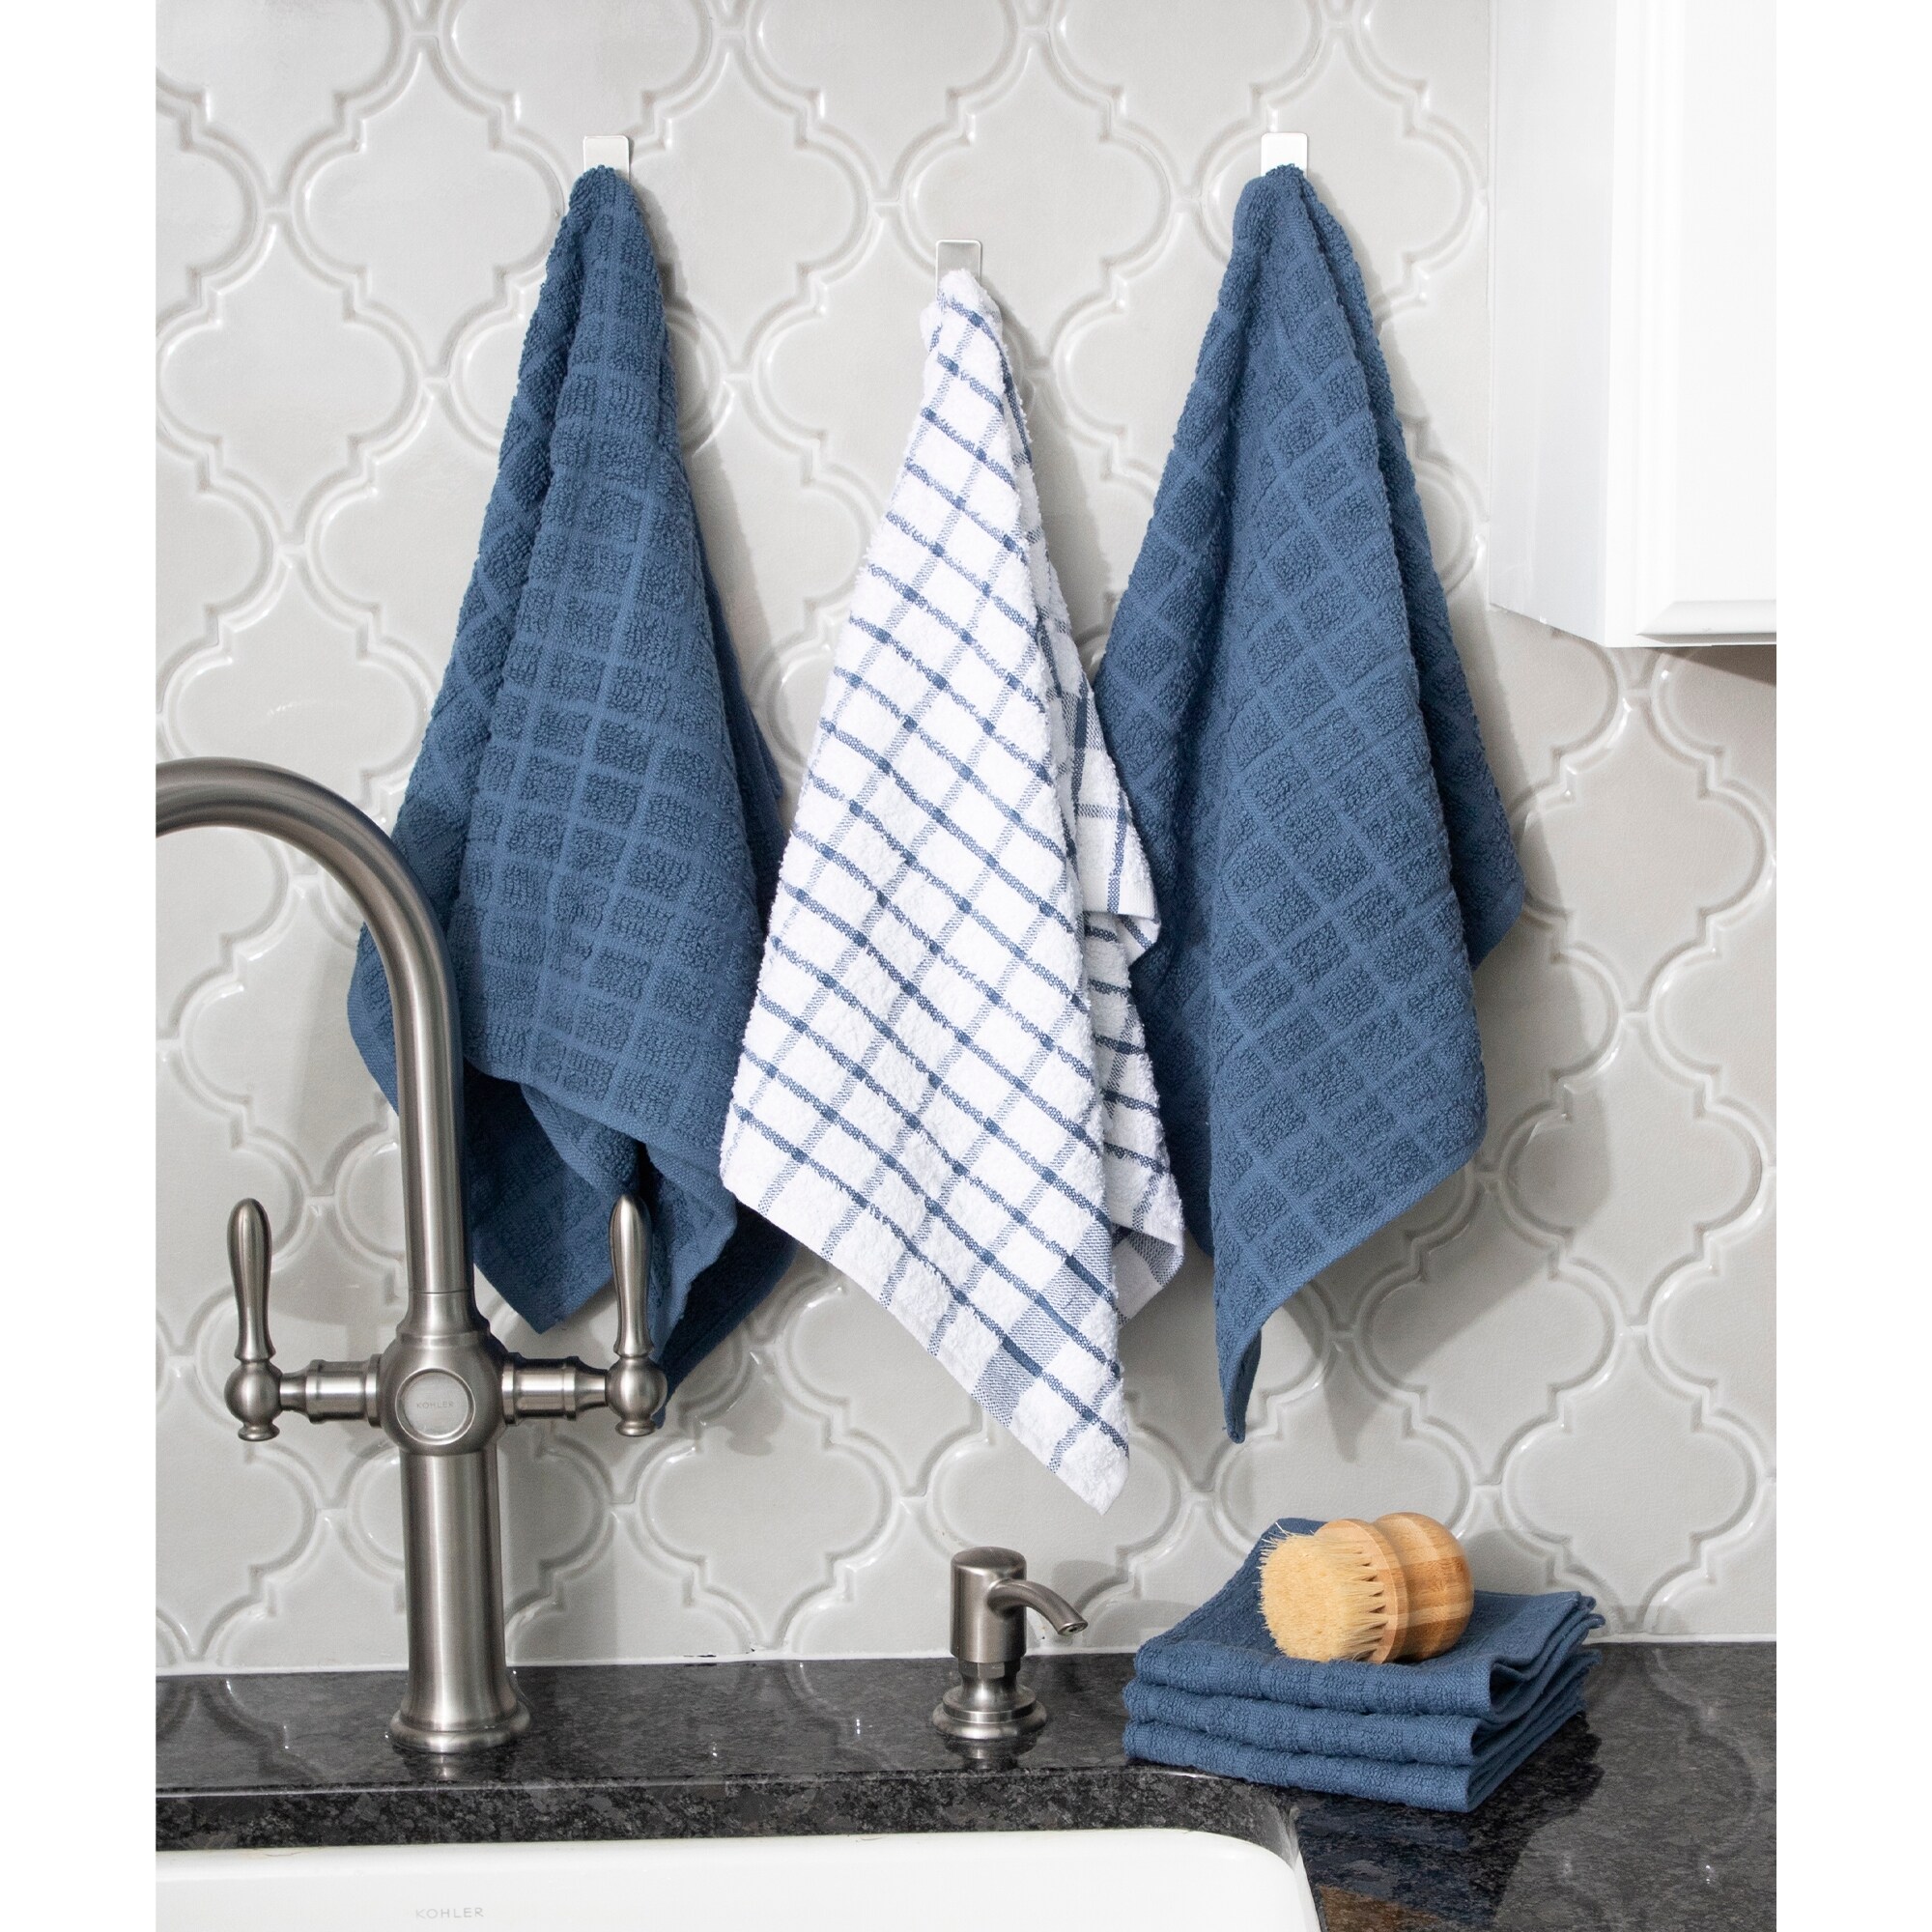 https://ak1.ostkcdn.com/images/products/is/images/direct/490c2edf113f8bee98f4850cefe3eece912f1d15/RITZ-Terry-Kitchen-Towel-and-Dish-Cloth%2C-Set-of-3-Towels-and-3-Dish-Cloths.jpg